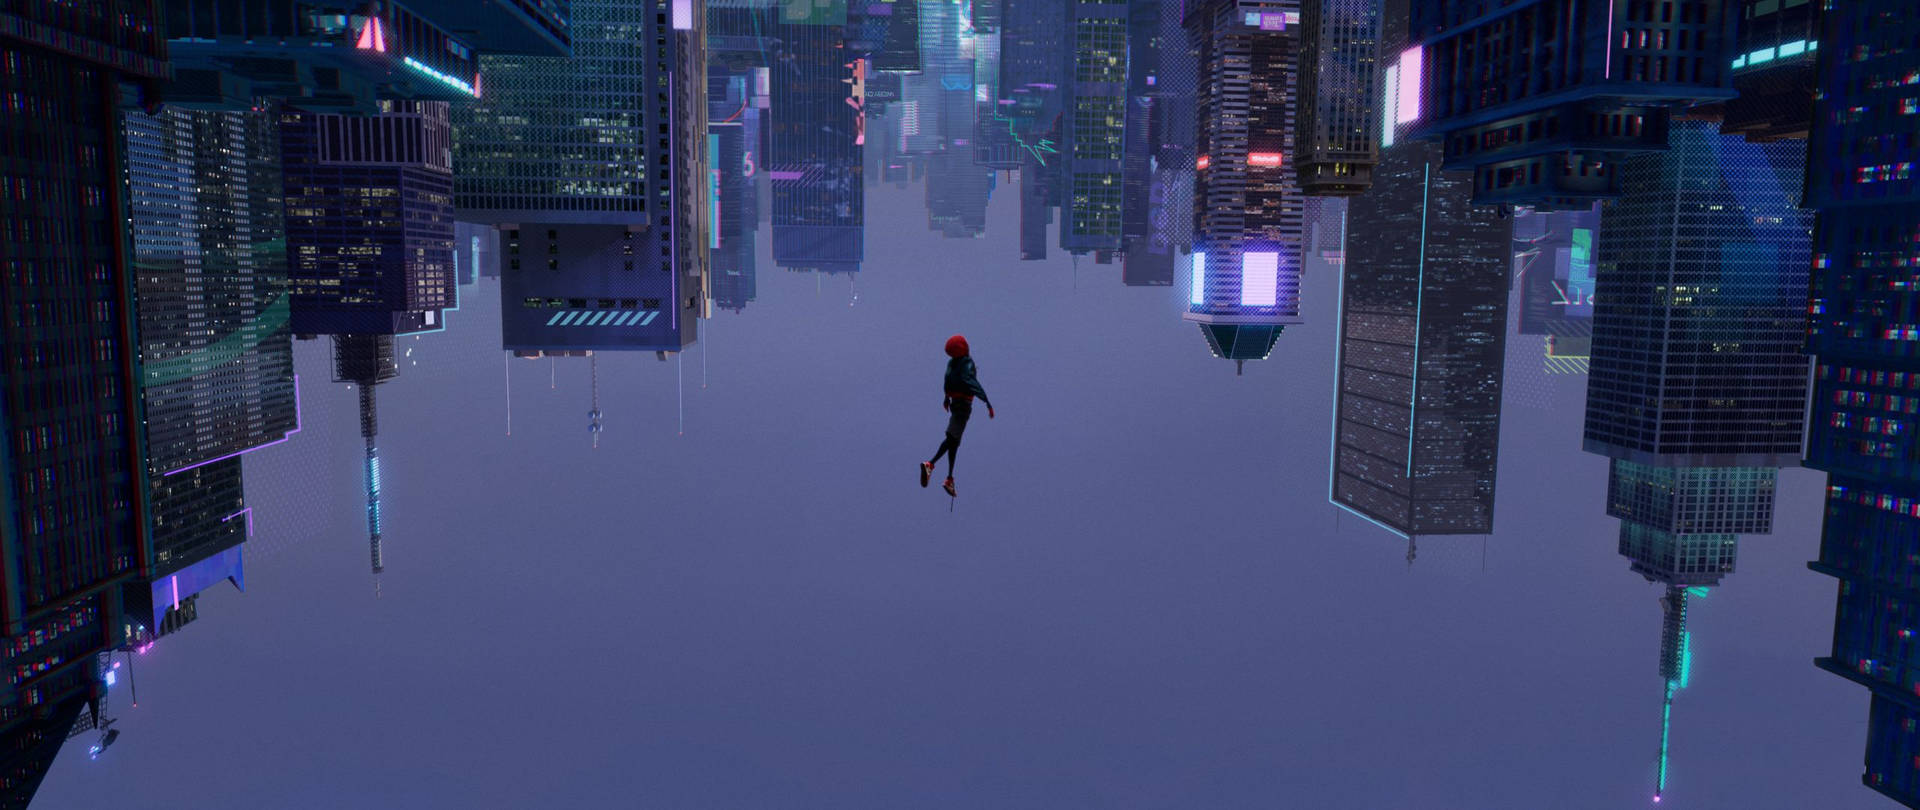 Spiderman Falling Down Background